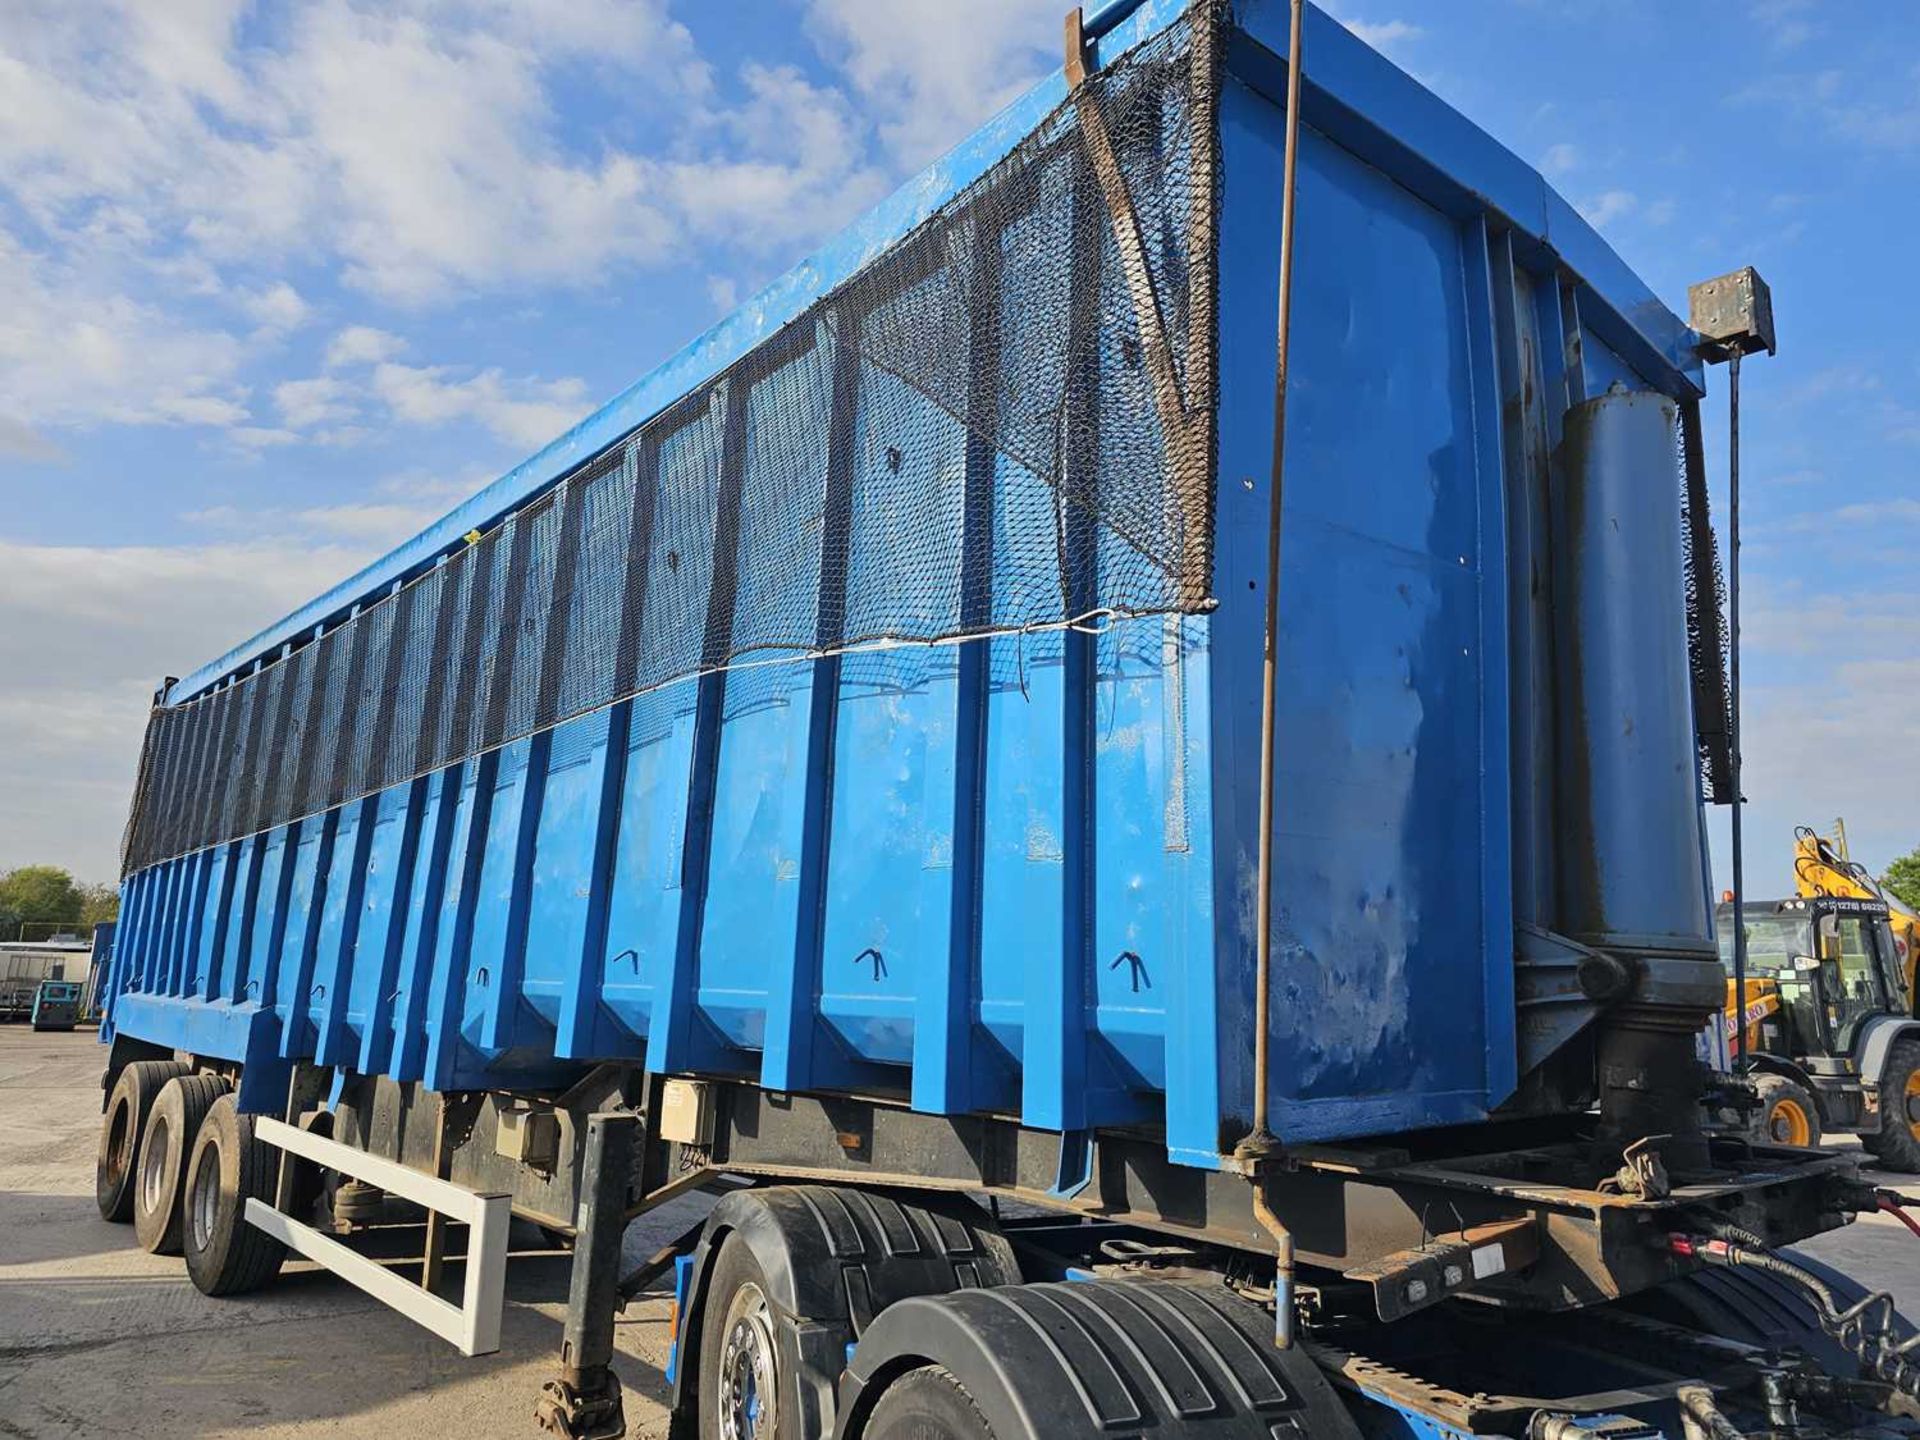 2008 Montracon Tri axle Bulk Tipping Trailer, WLI, 50/50 Sheets, Barn Doors (Tested 03/25) - Image 4 of 14